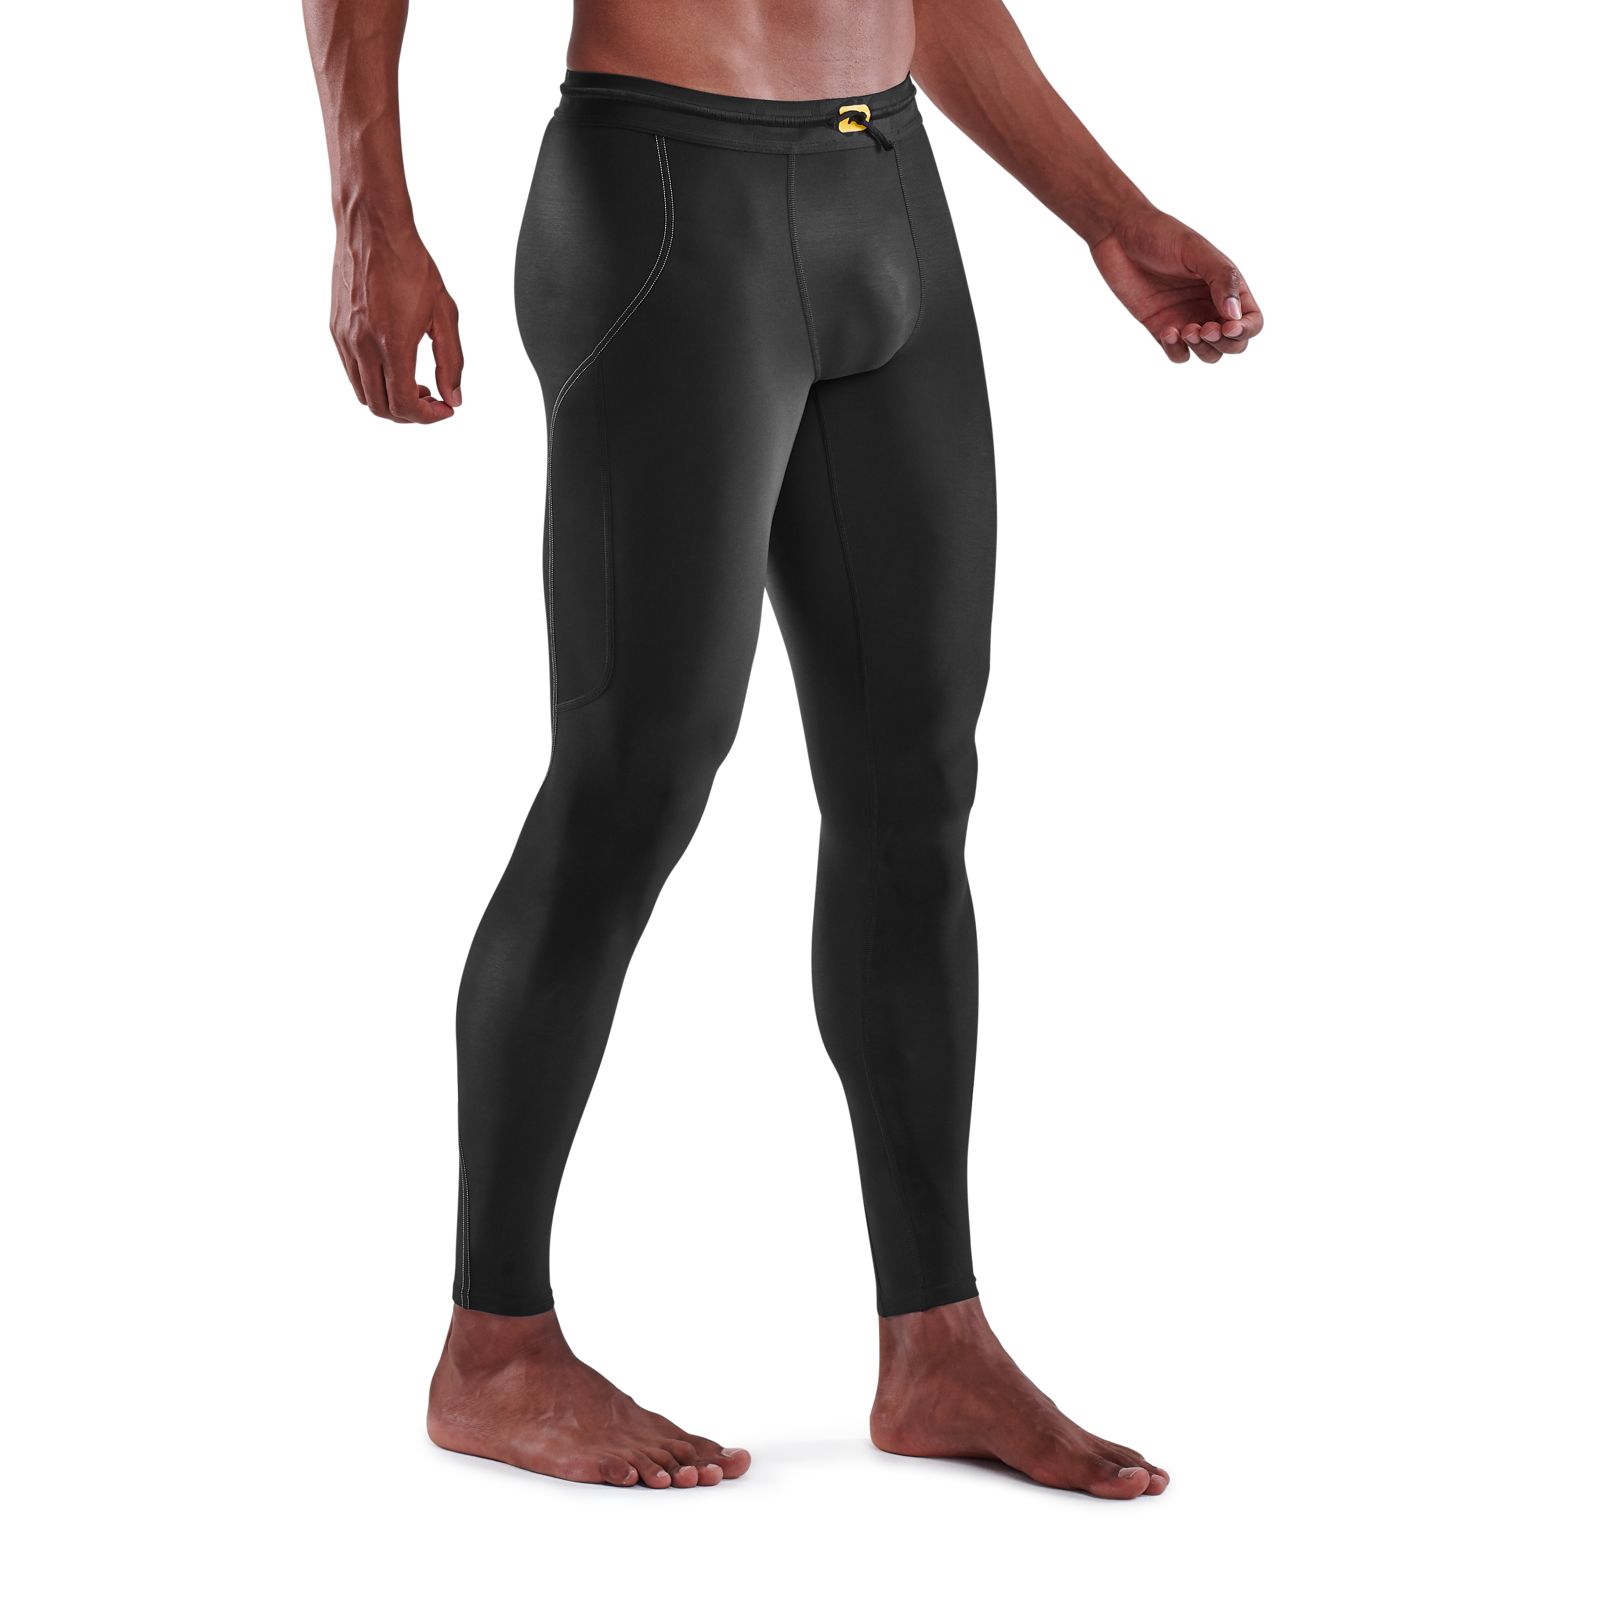  Skins Men's Dynamic Team Thermal Long Compression Tights,  Black, X-Small : Clothing, Shoes & Jewelry